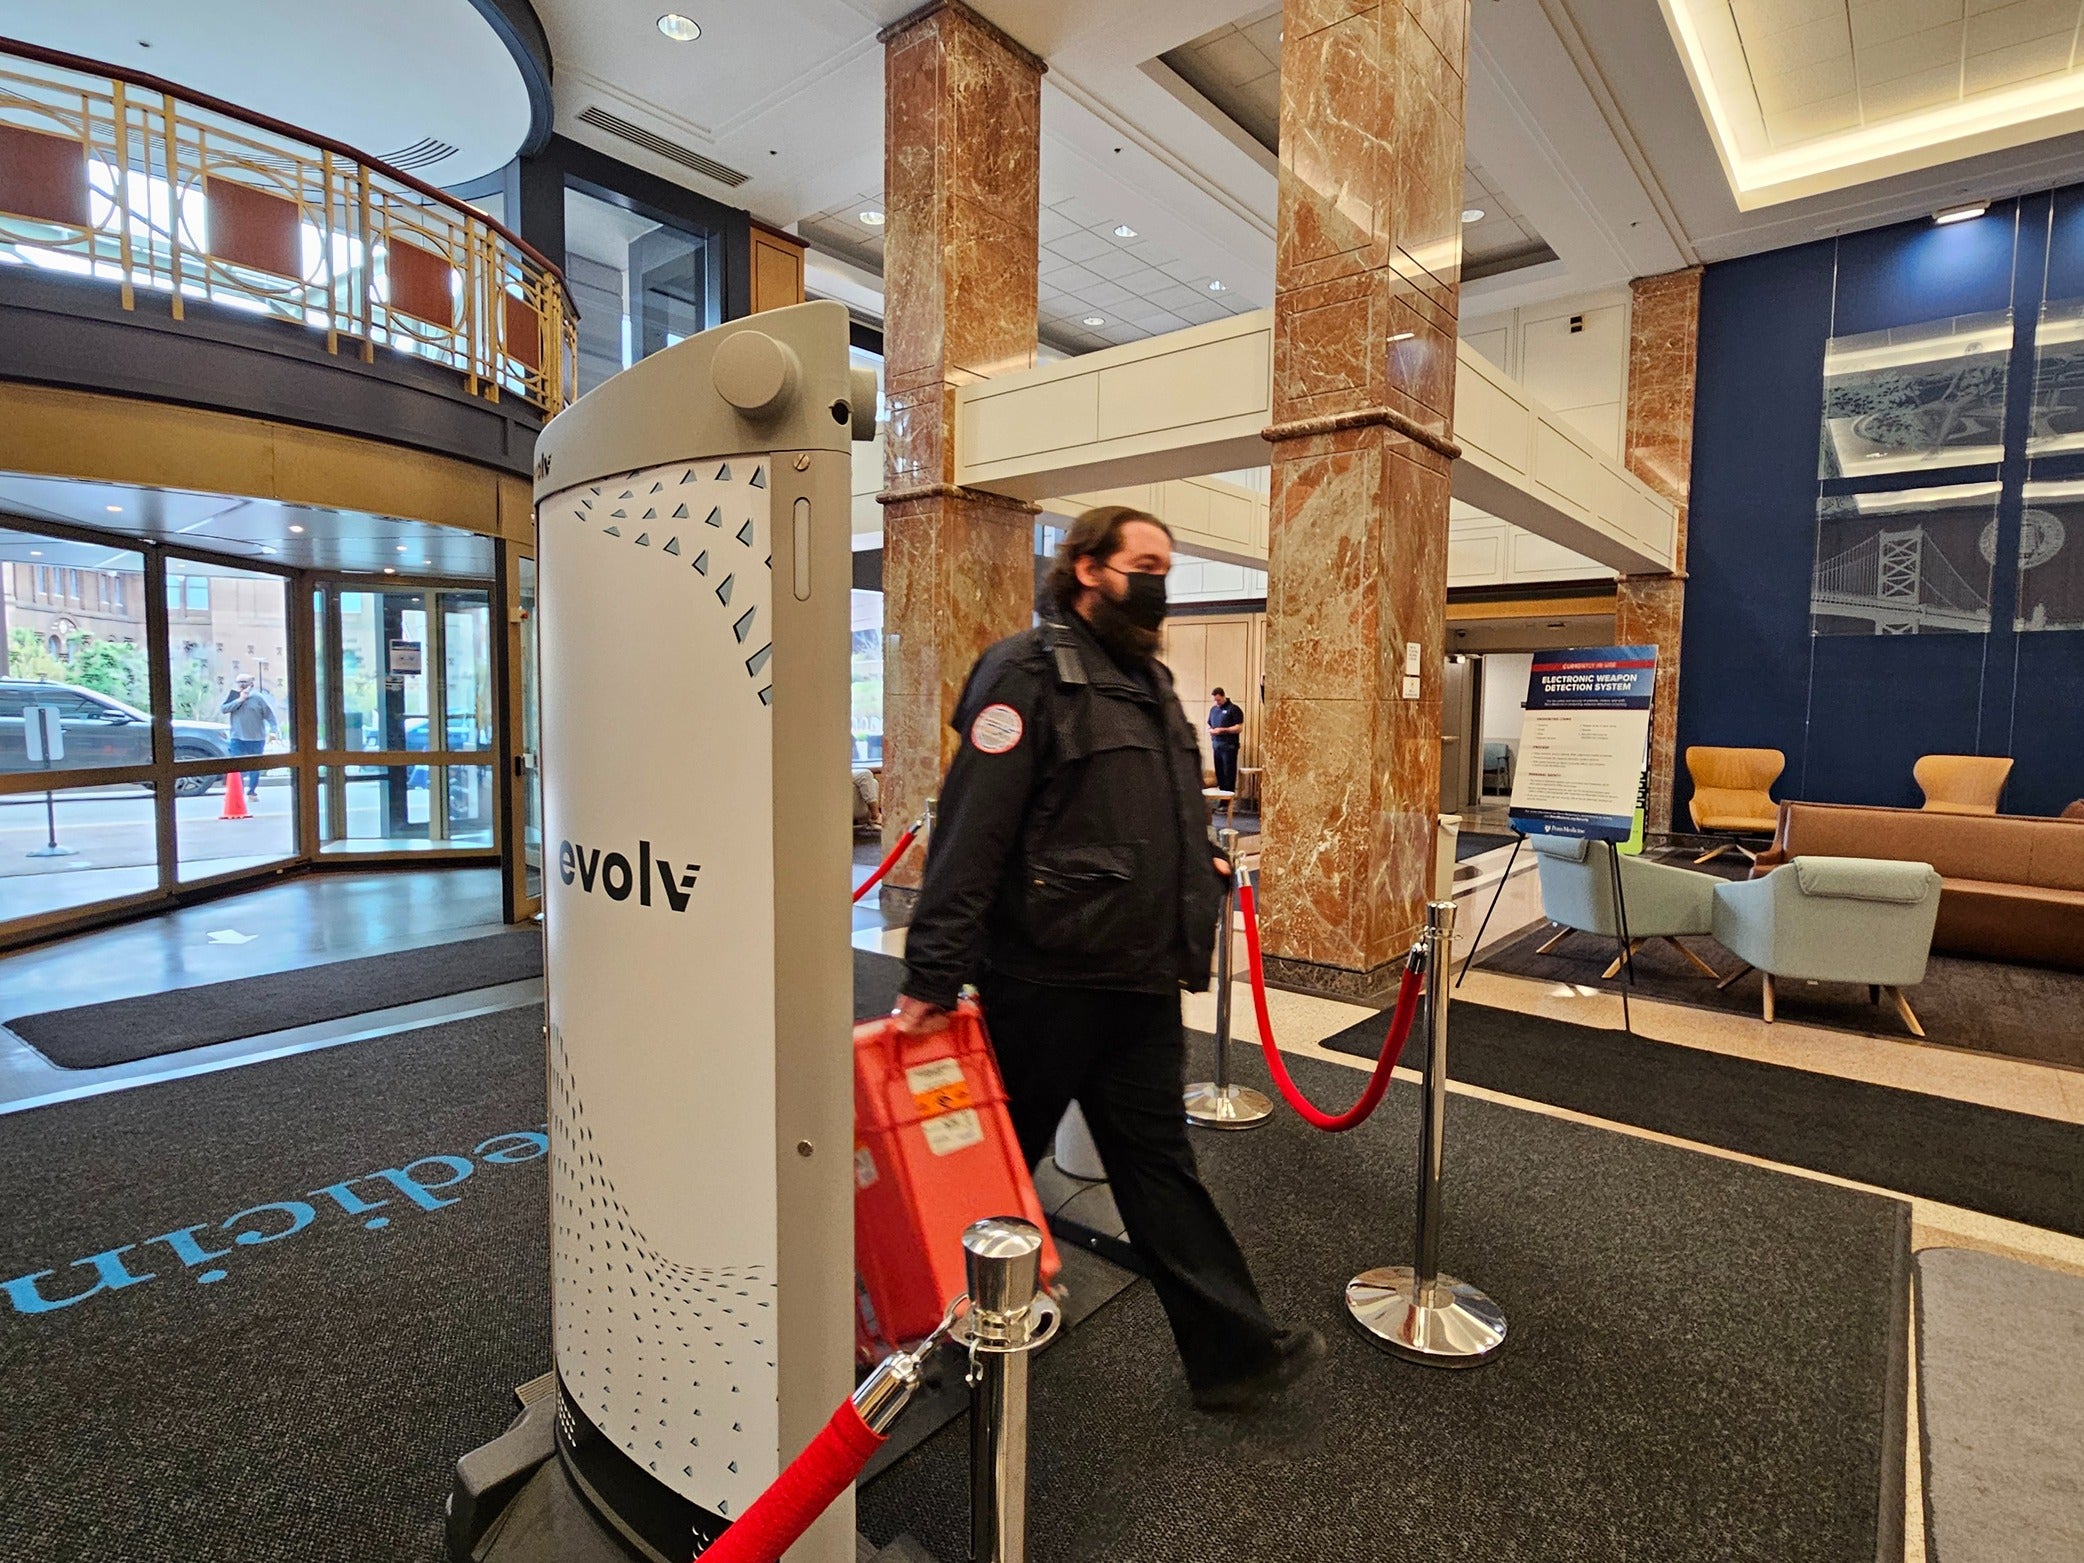 A security guard walks through the Evolv weapons detection security system in the main lobby at the Hospital of the University of Pennsylvania